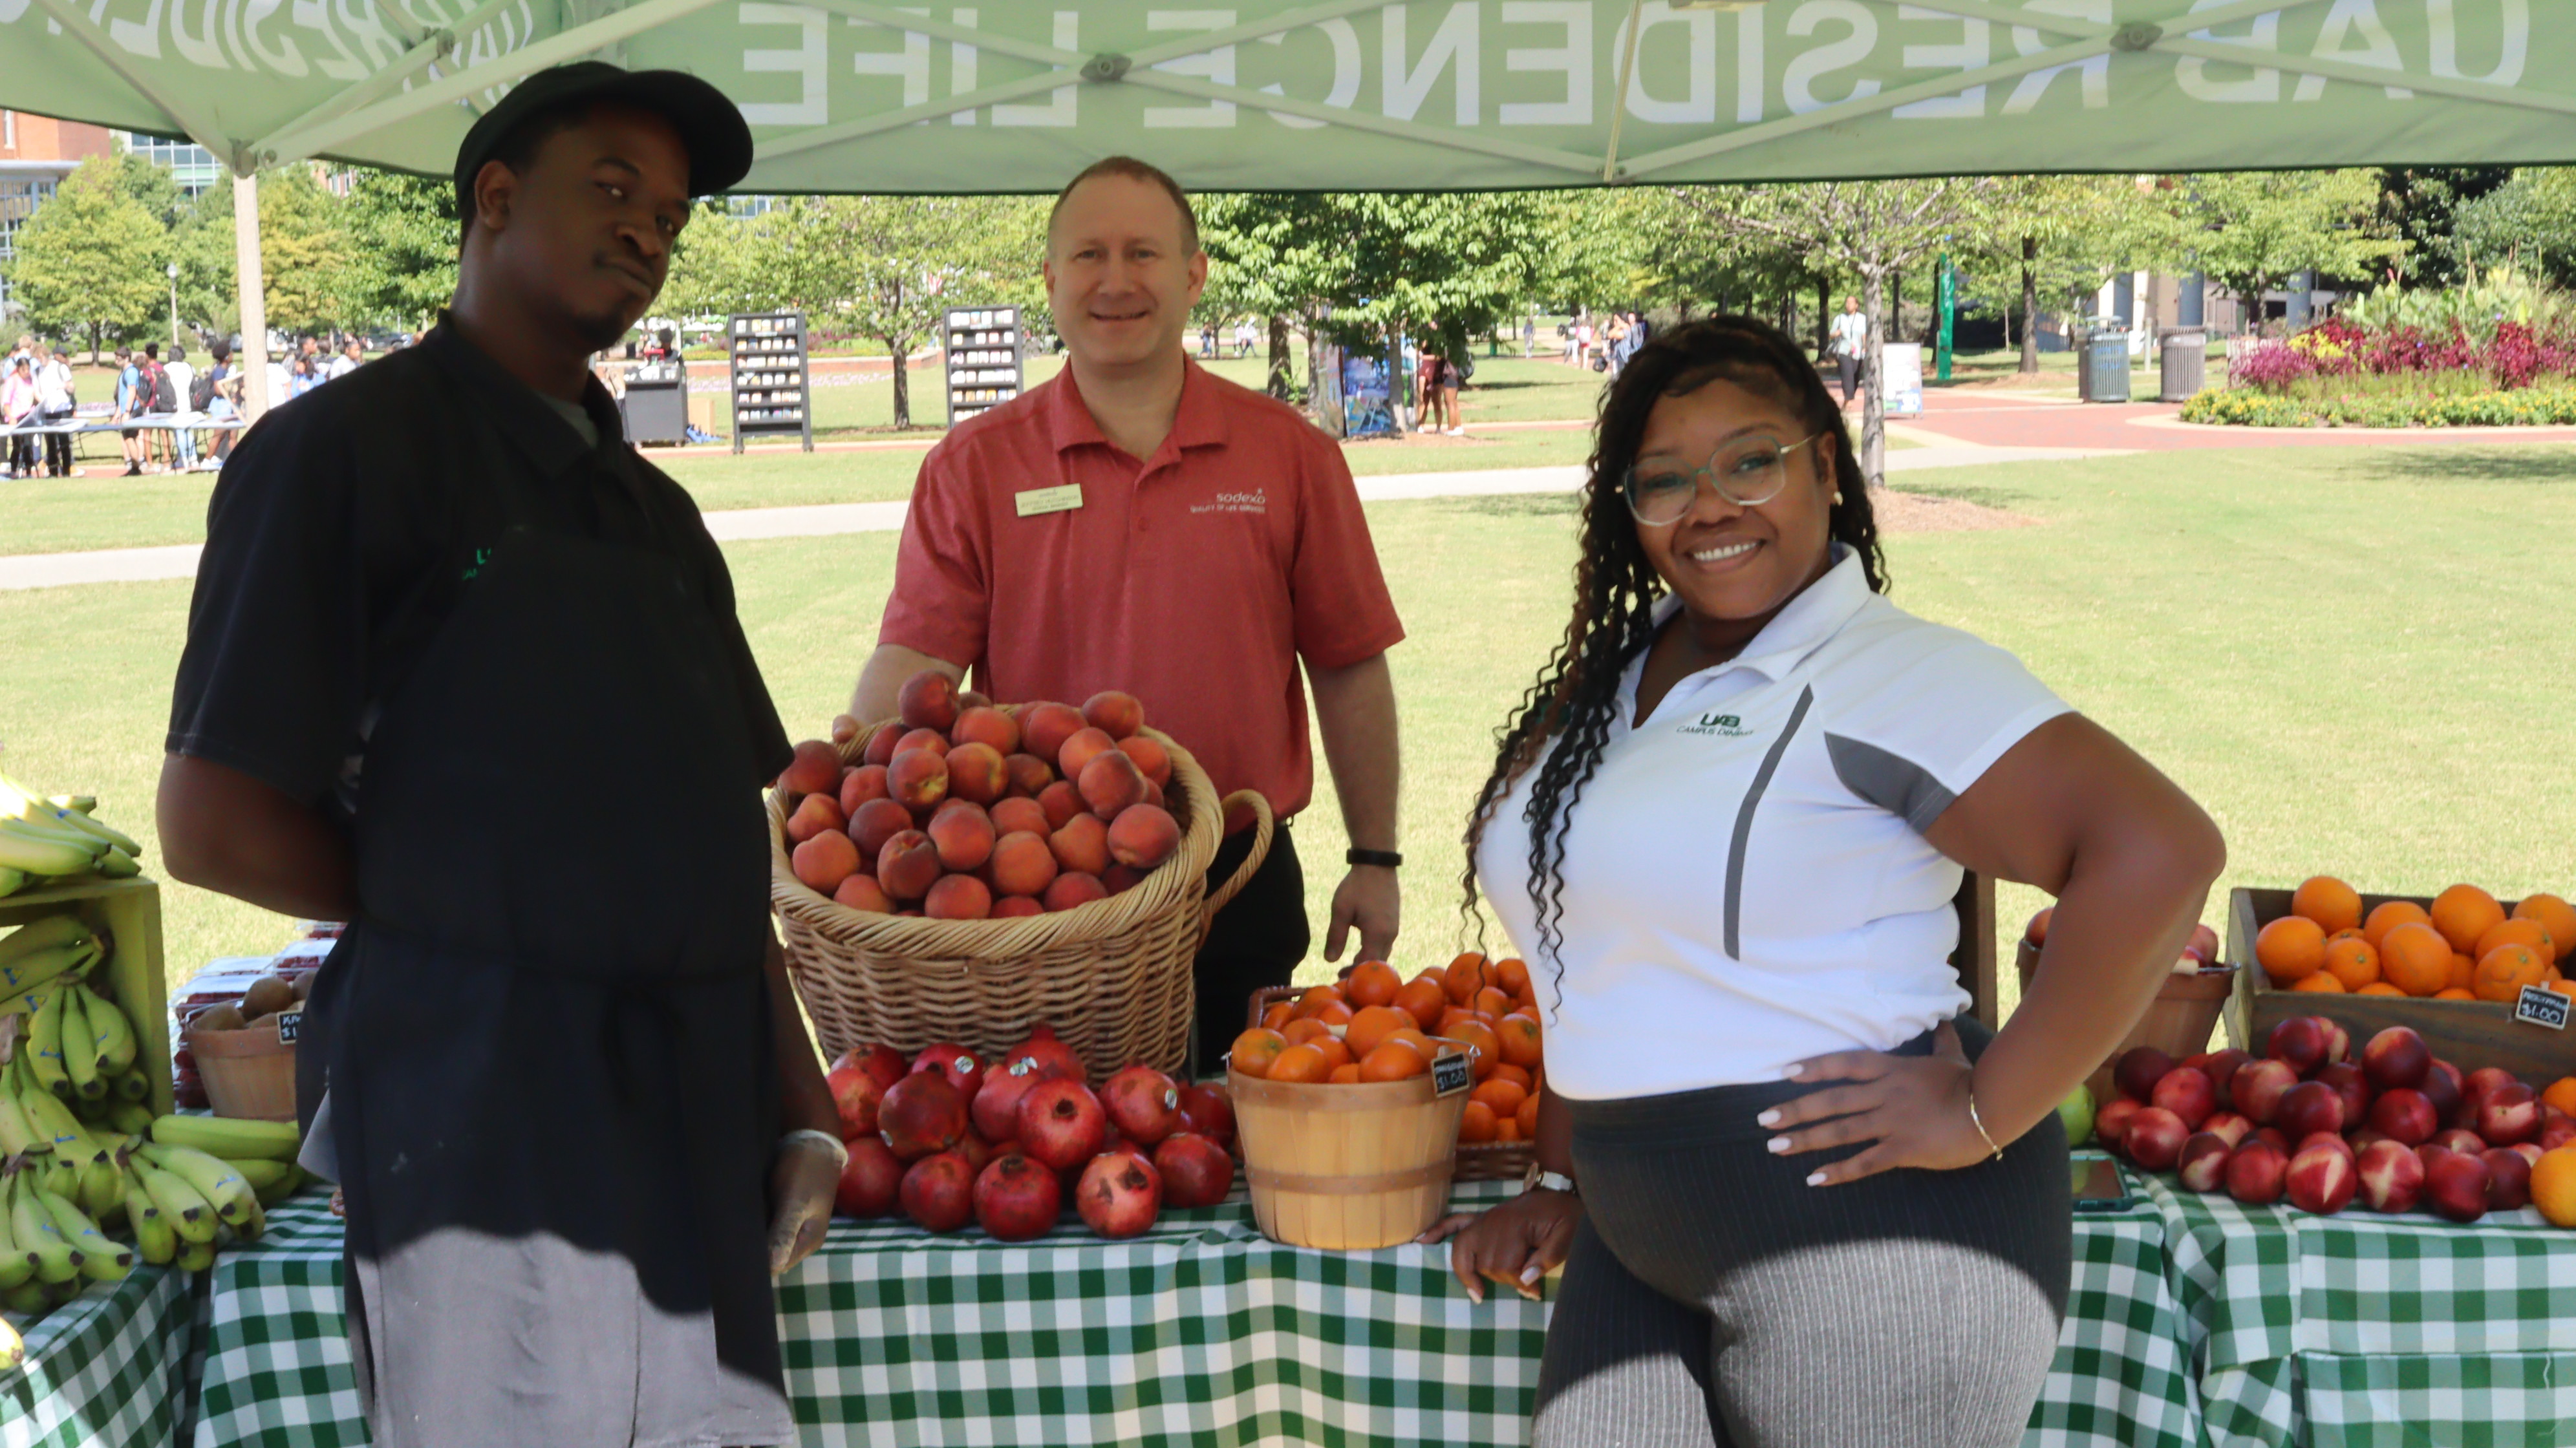 UAB Dining hosts Fresh Market on the Campus Green